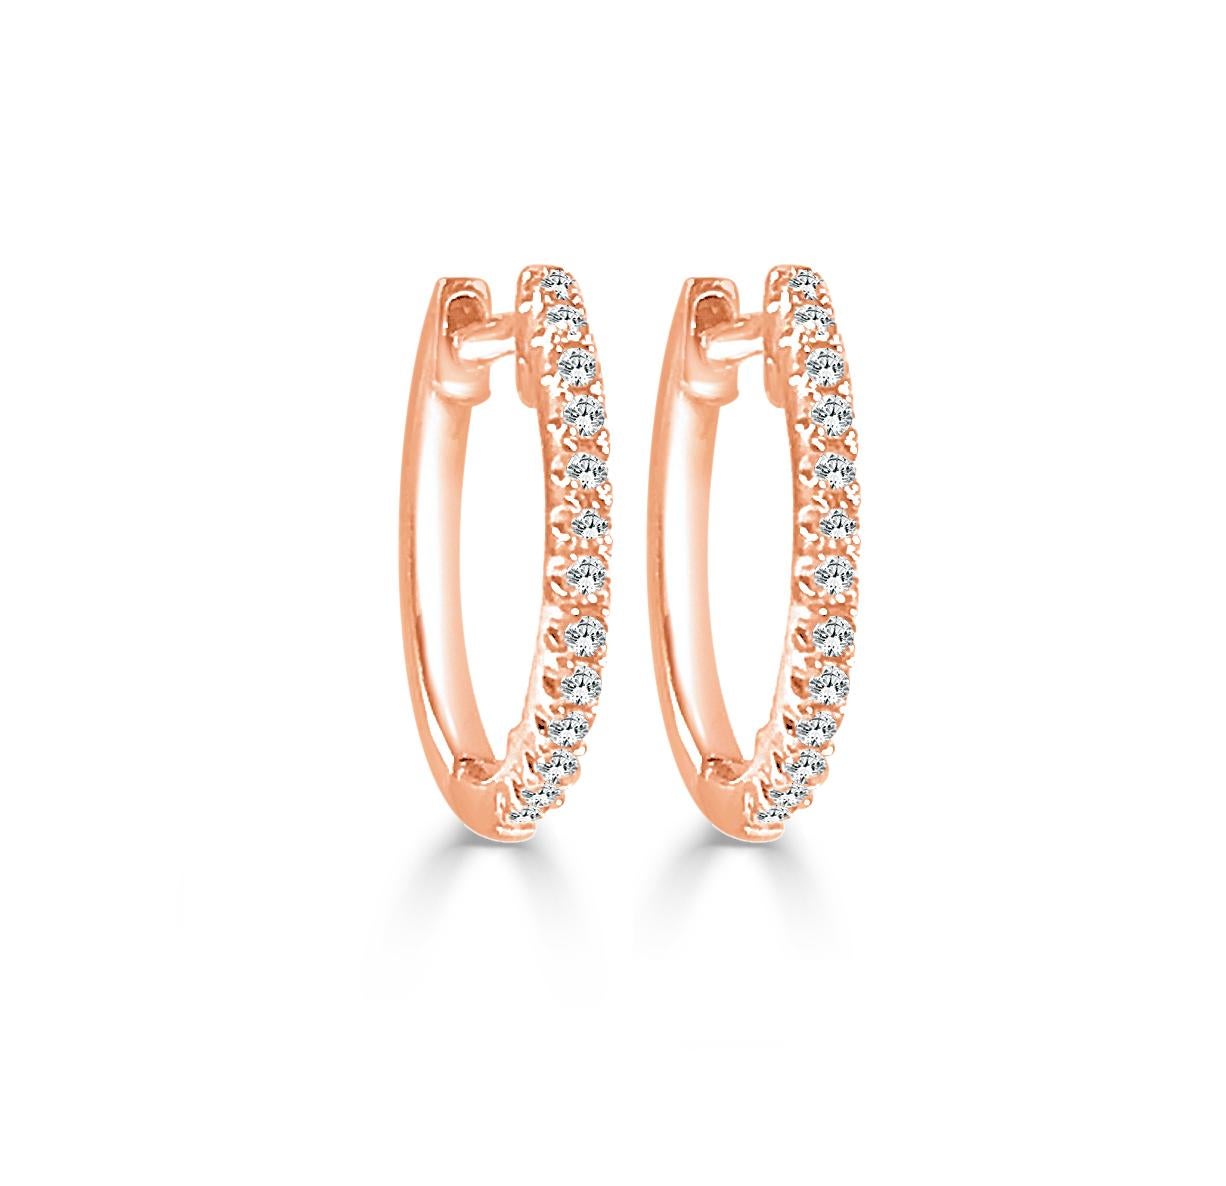 Simple yet stunning, these Diamond huggie hoops are crafted from 14k gold with glittering white 0.09 ct. of diamonds. Each delicate U-shaped hoop features a single line of white diamonds, pave-set across the face in a gorgeous display. 1/2